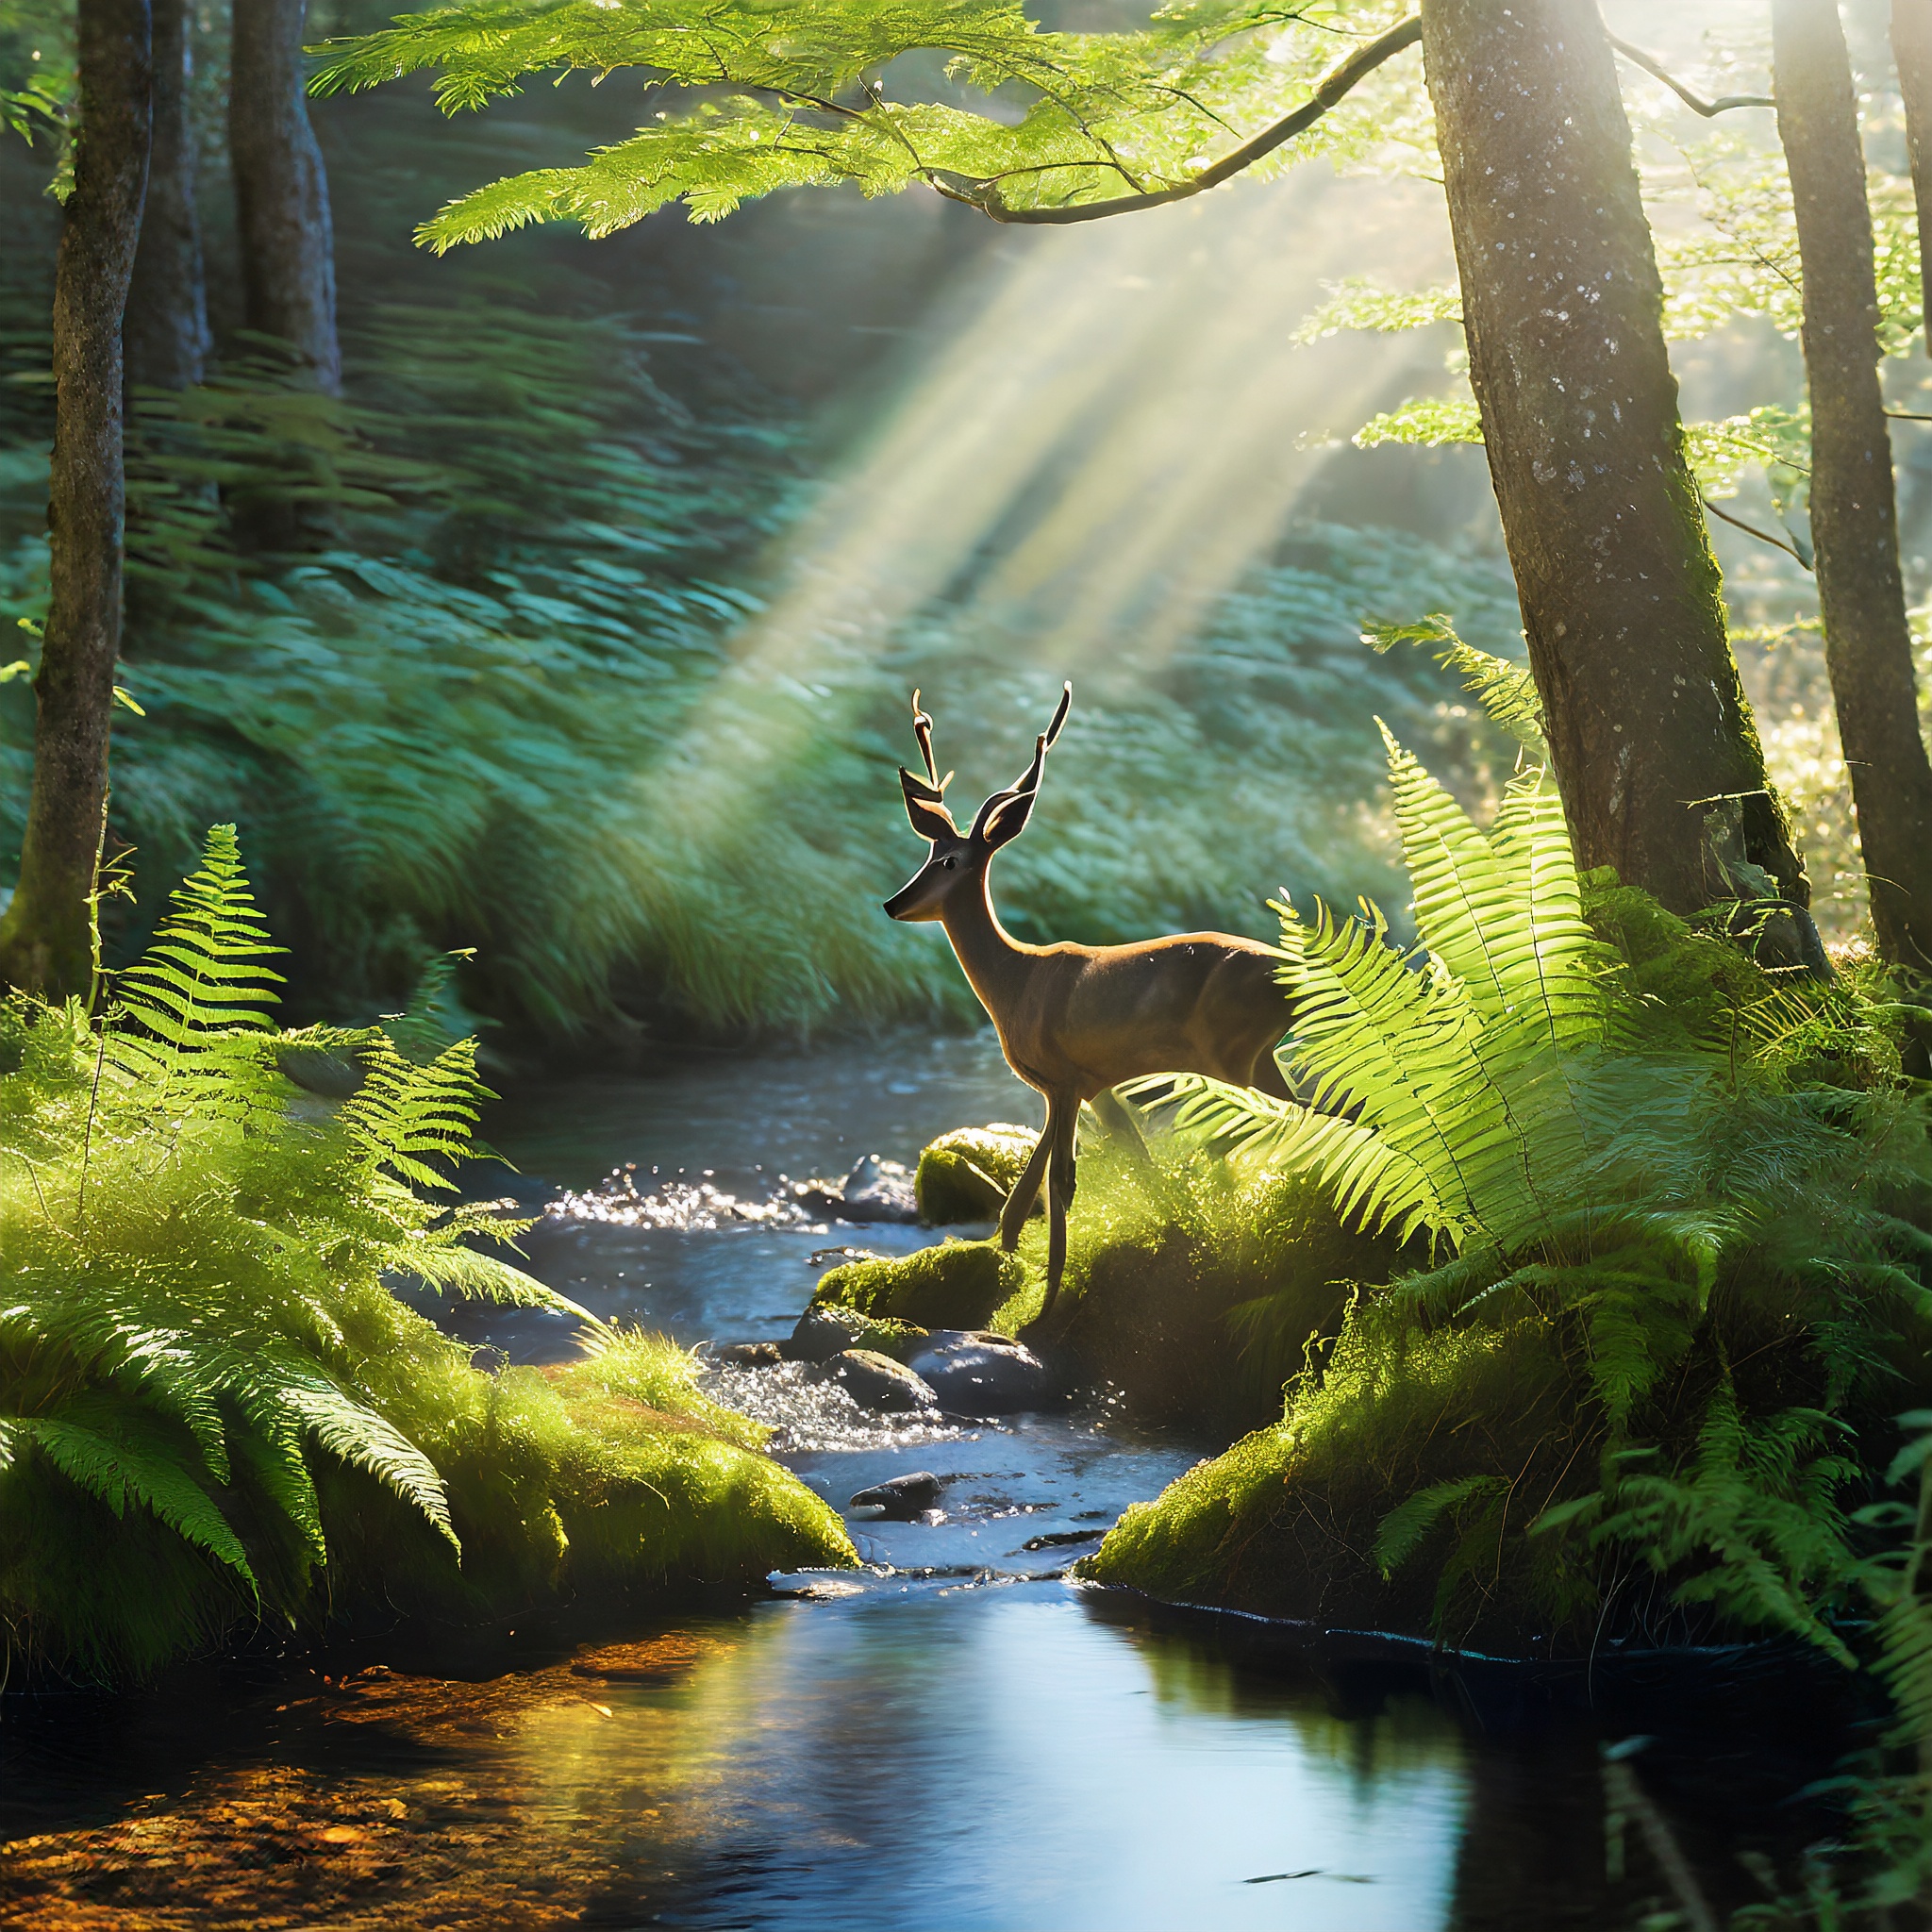 Firefly rendering of a brook through a forest with a deer